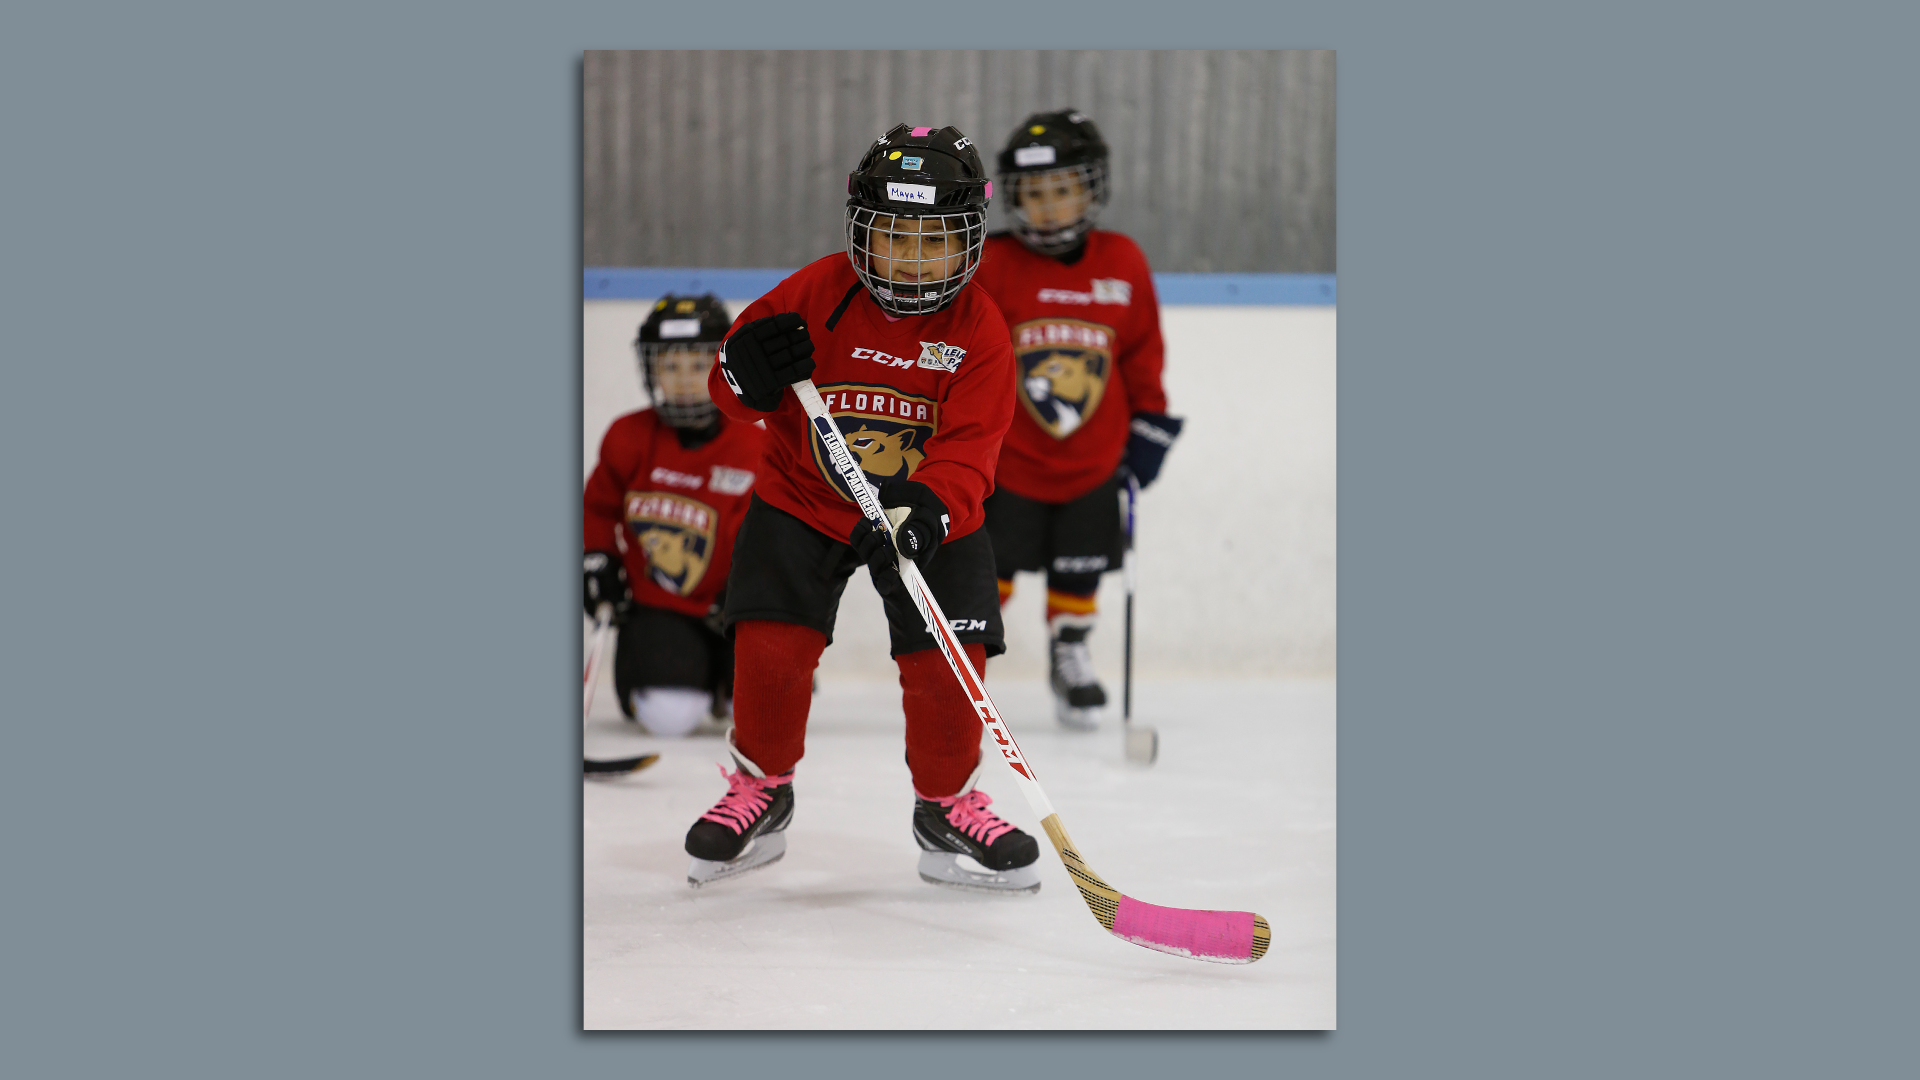 Youth hockey on the rise in South Jersey